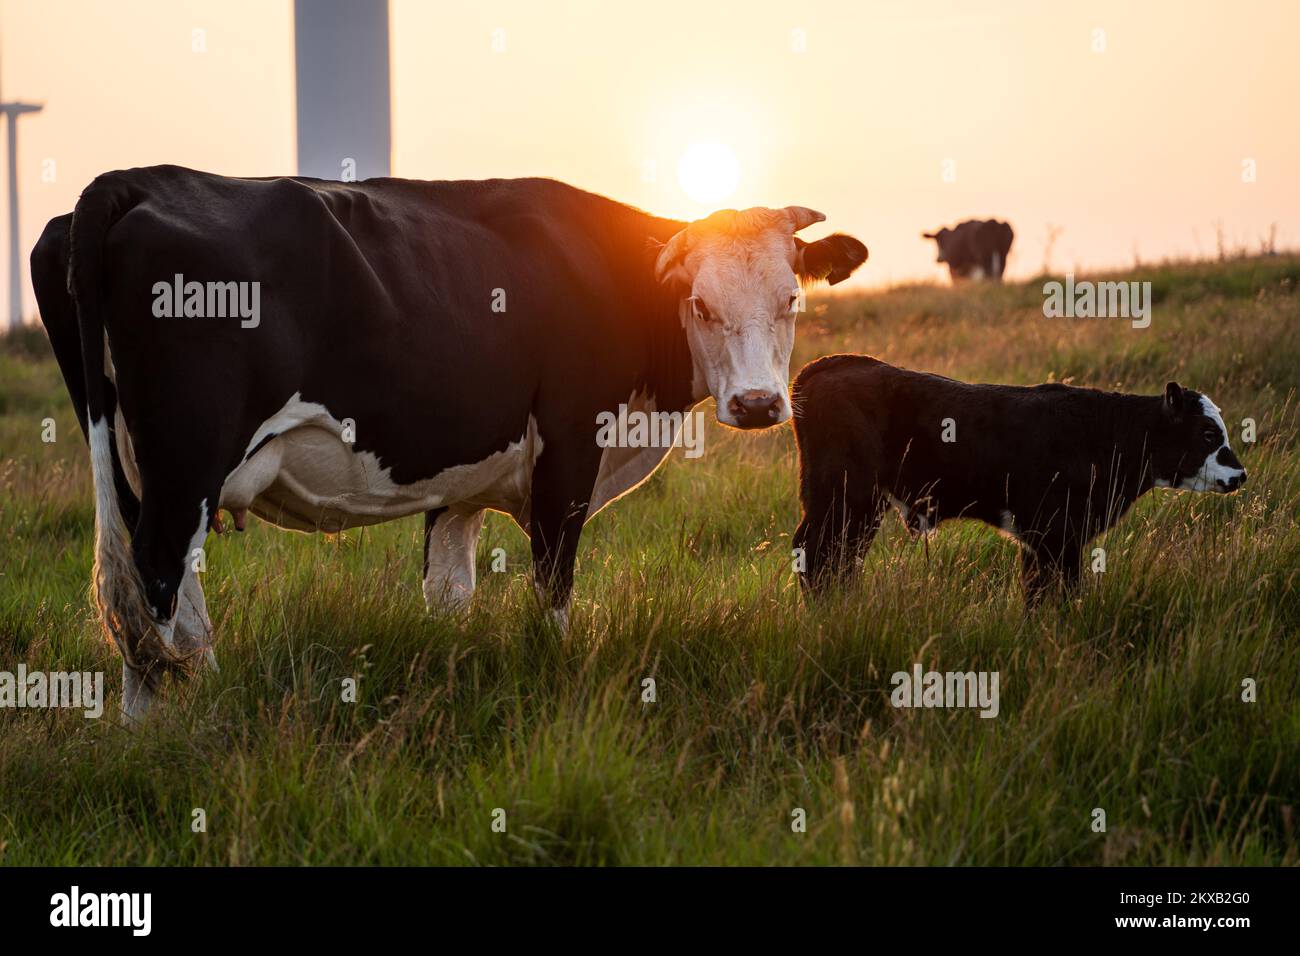 Cow and adorable black and white calf, pasture at sunset background. Wales, UK. Stock Photo